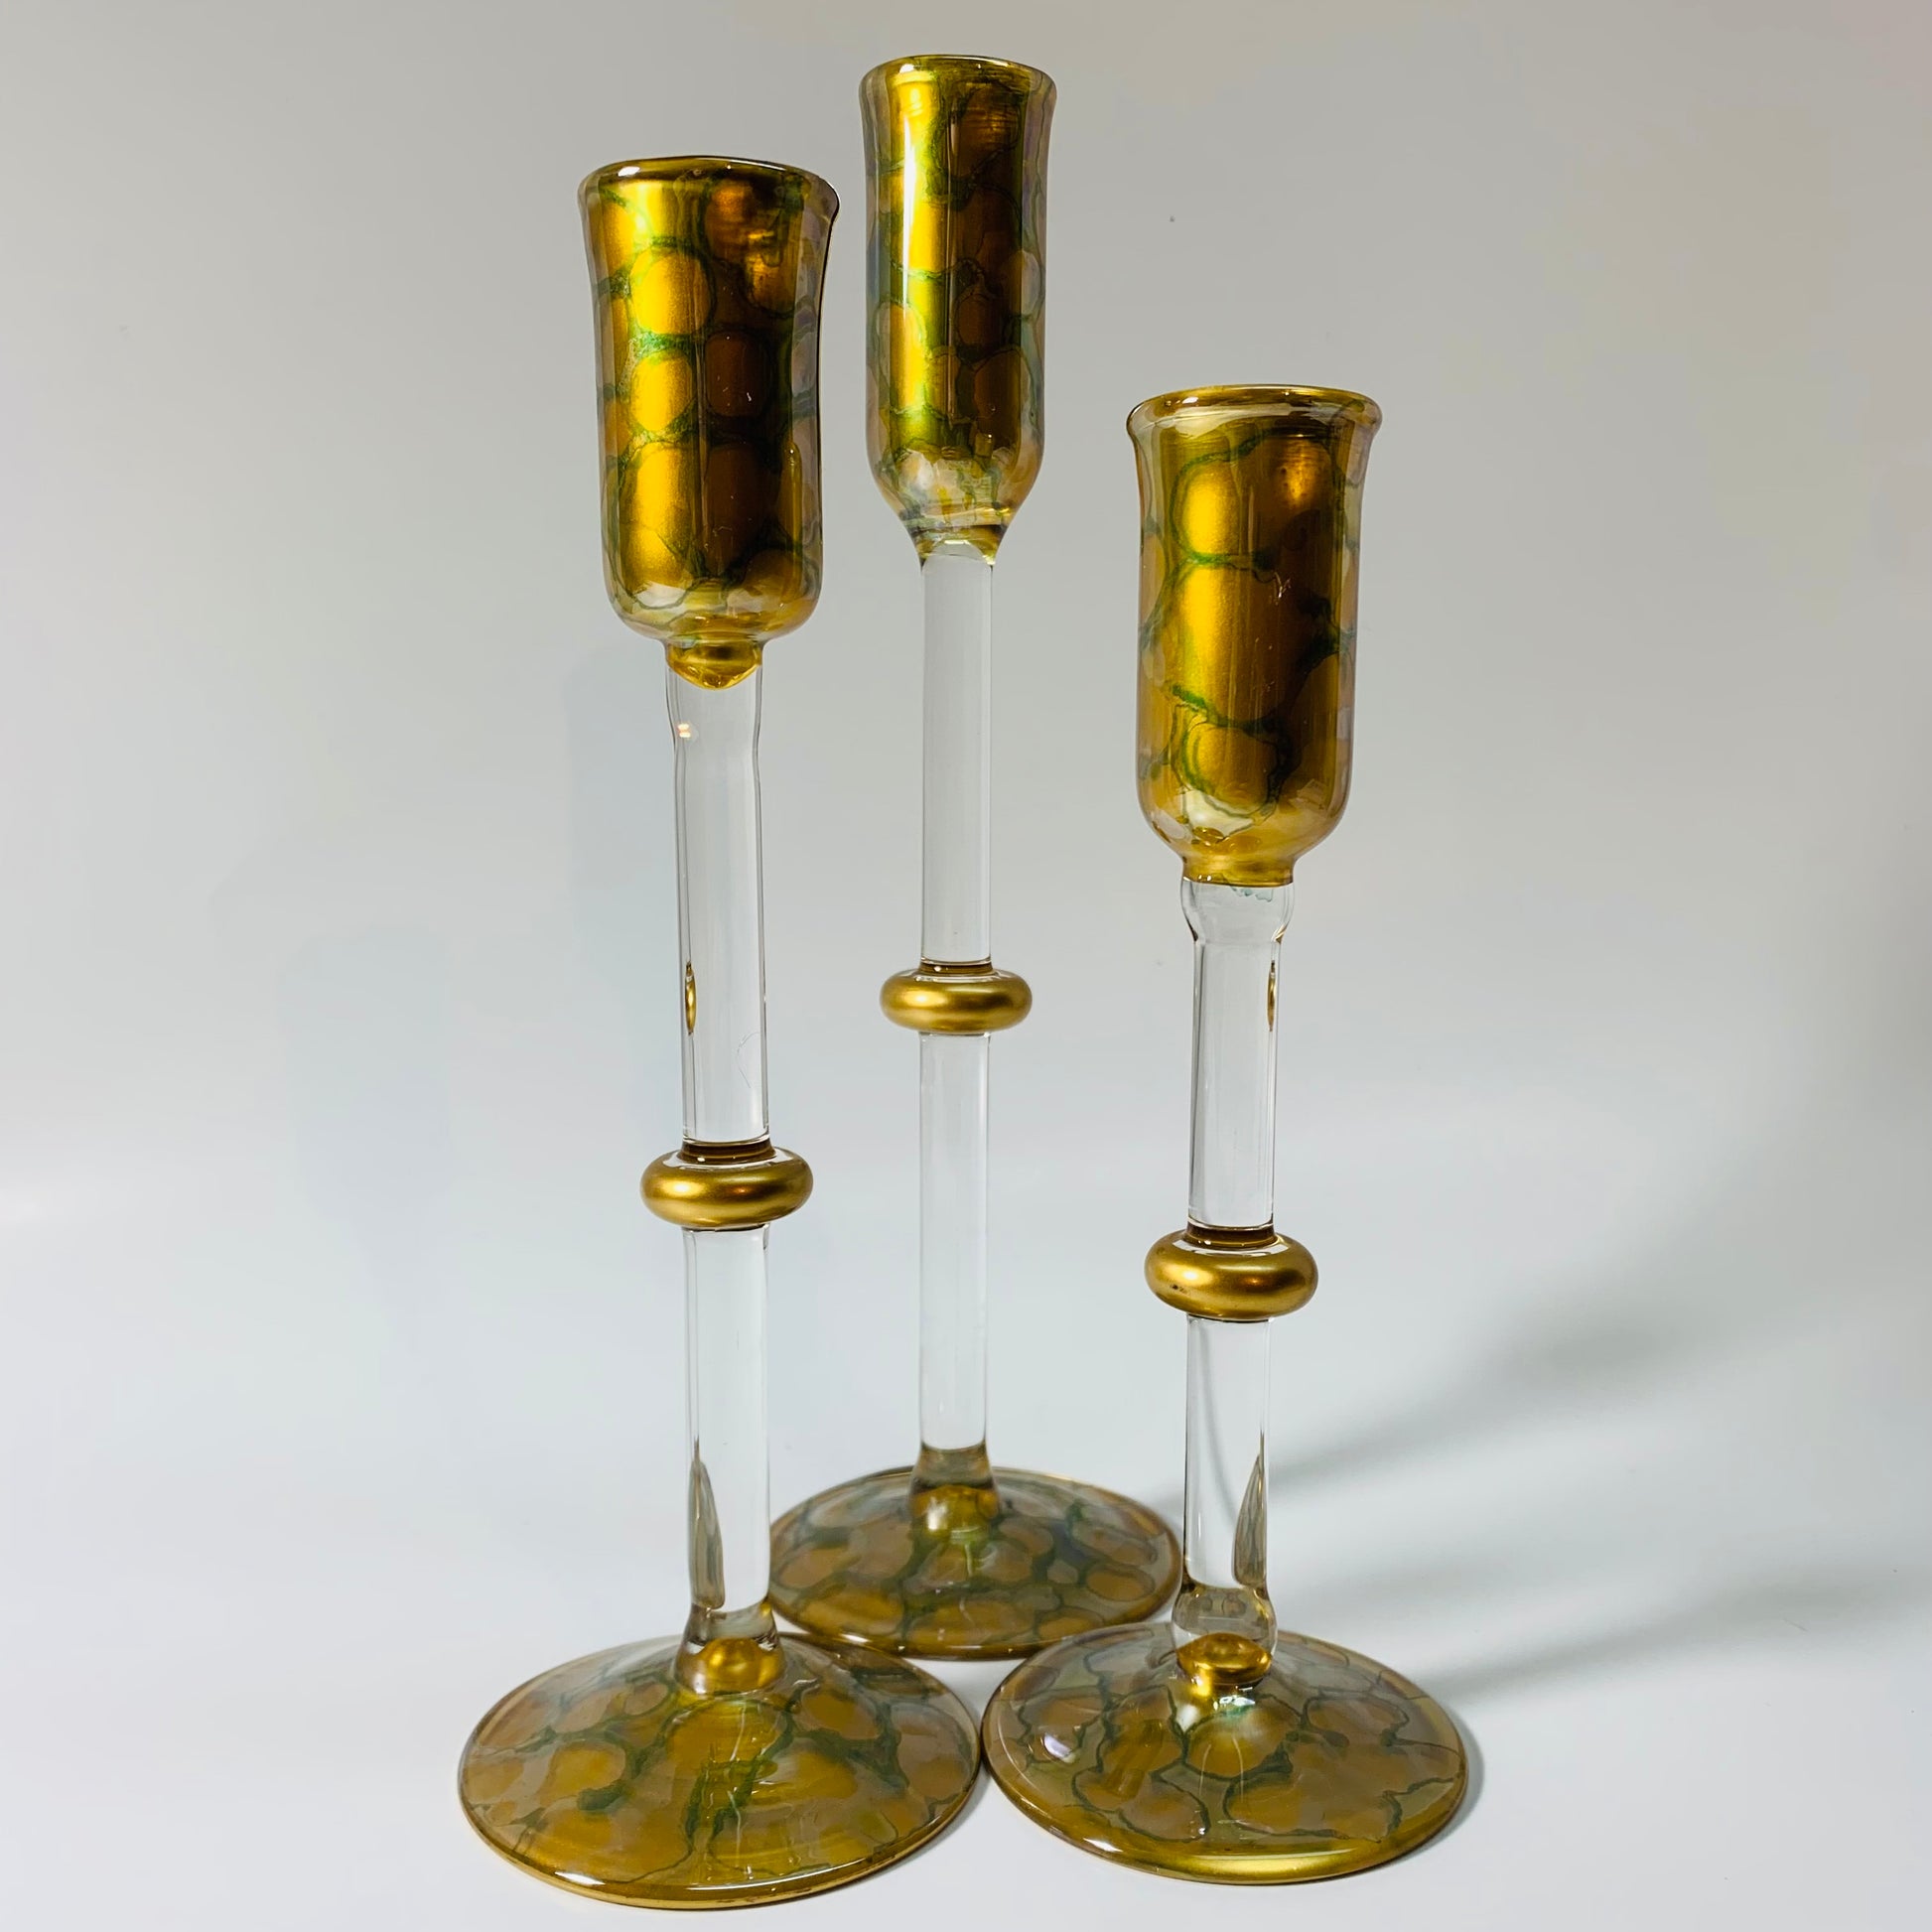 Long Stem Blown Glass Candle Holder - Tulip Gold & Green